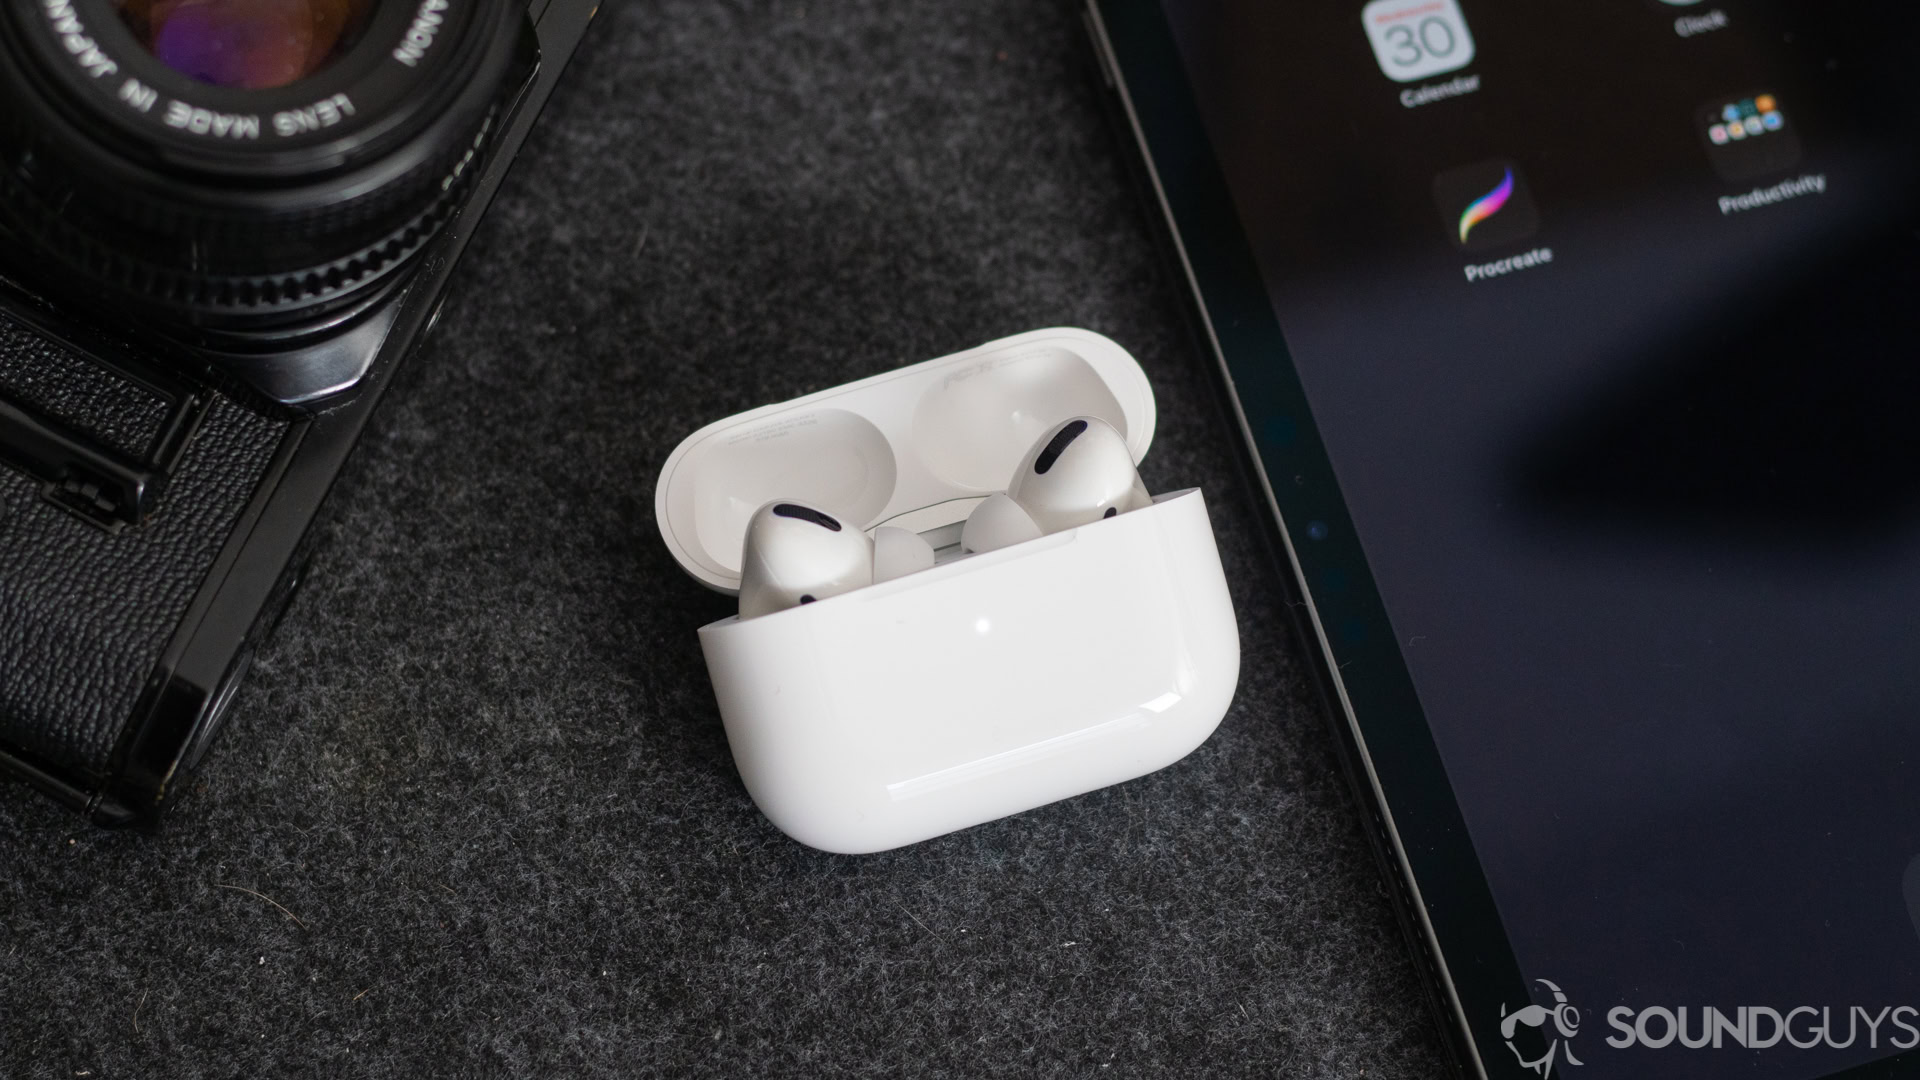 AirPods Pro earphones in the wireless charging case next to an iPhone and a digital camera.